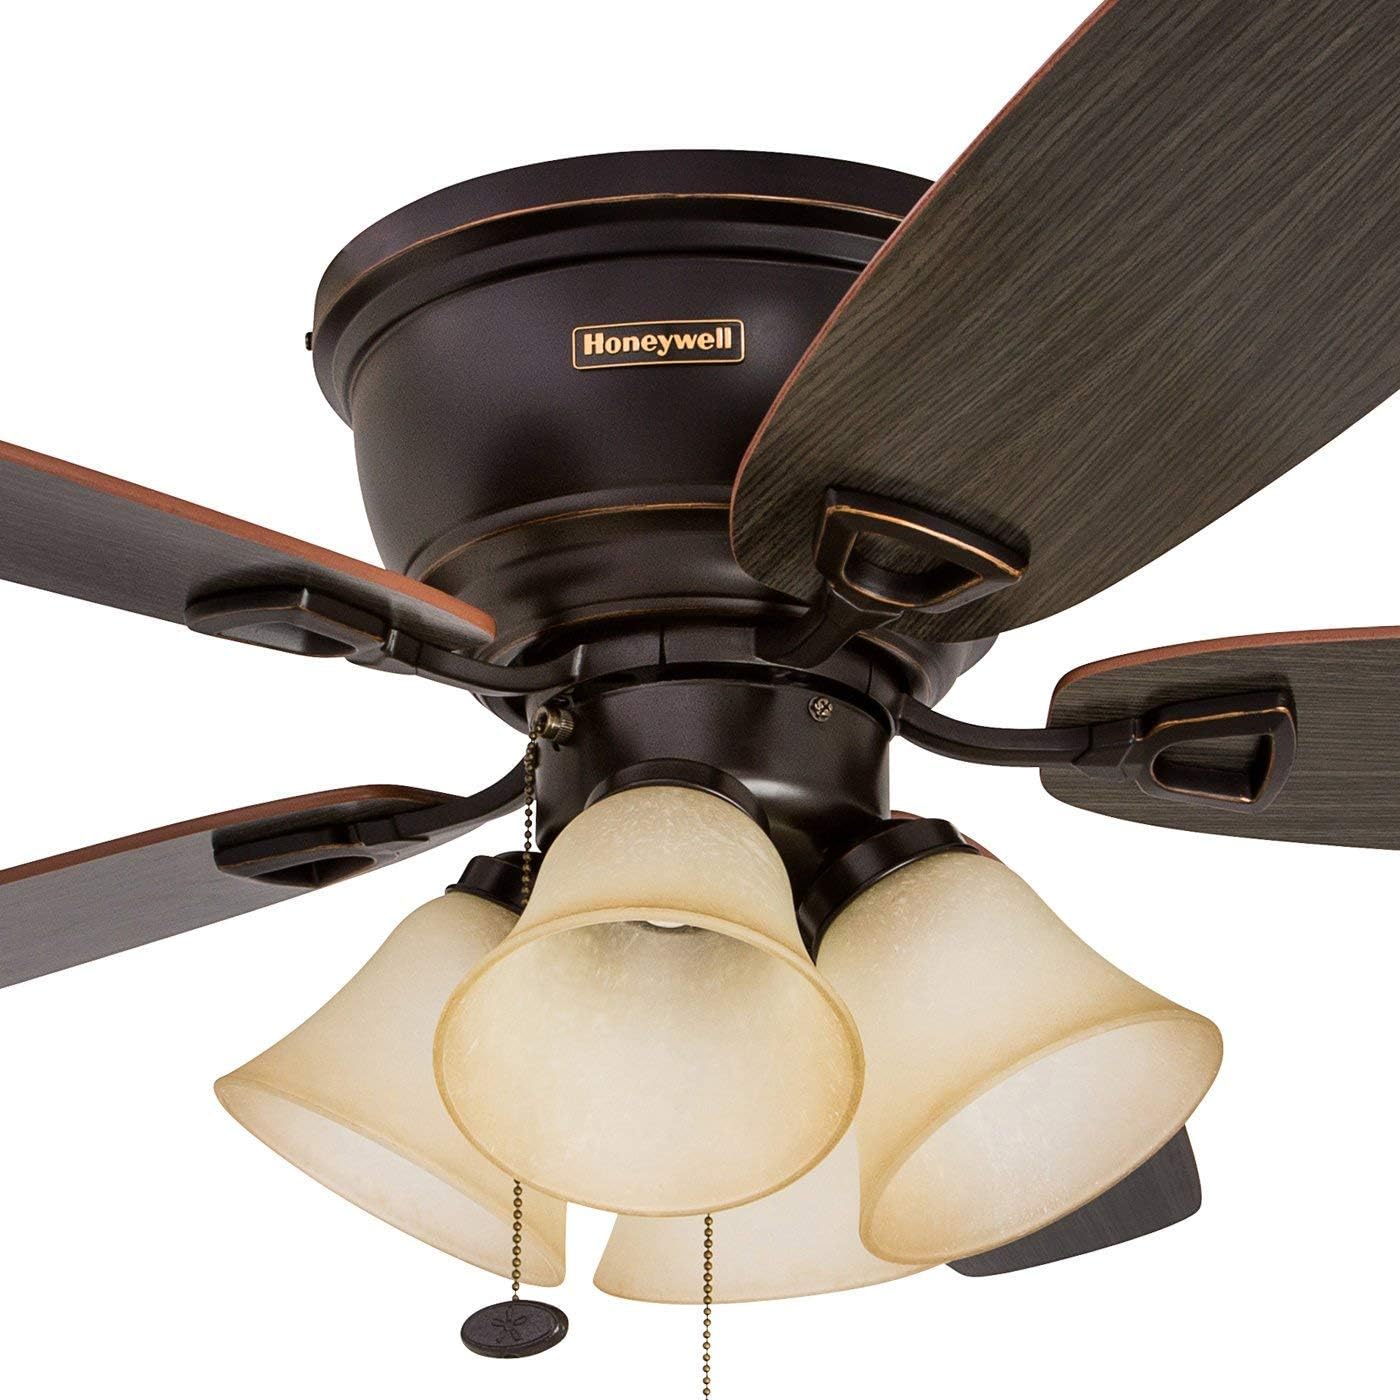 Honeywell Glen Alden - 52-in Contemporary Indoor Fan - Flush Mount Ceiling Fan with Pull Chain - Room Fan with No Light - Model 50183 (Oi